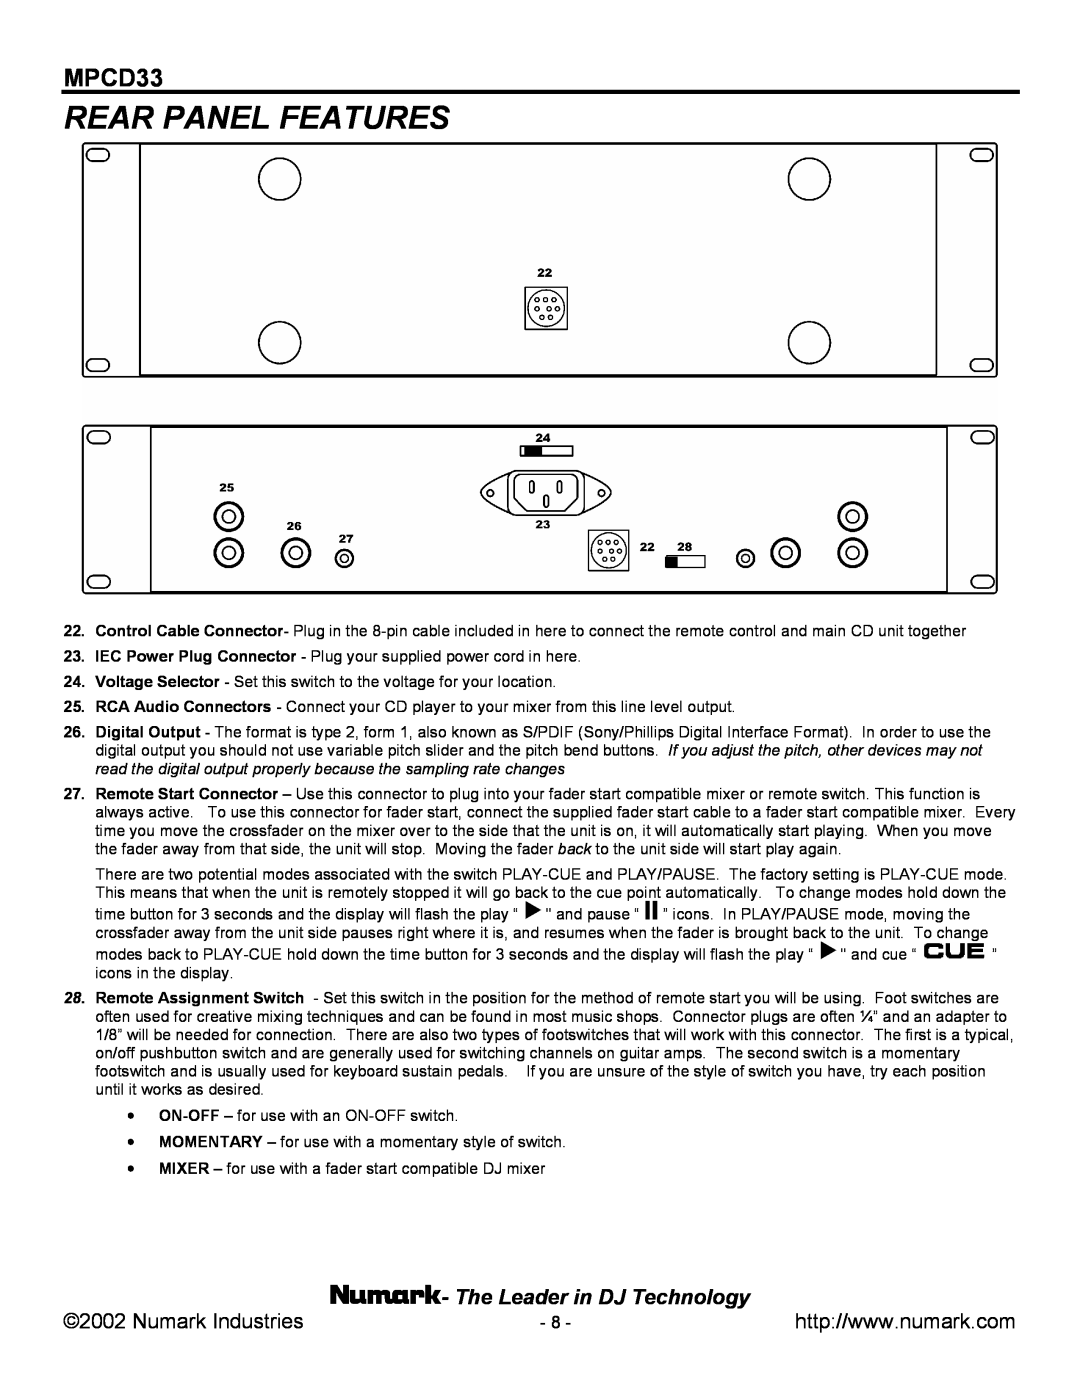 Numark Industries MPCD33 manual Rear Panel Features, Numark Industries, The Leader in DJ Technology 